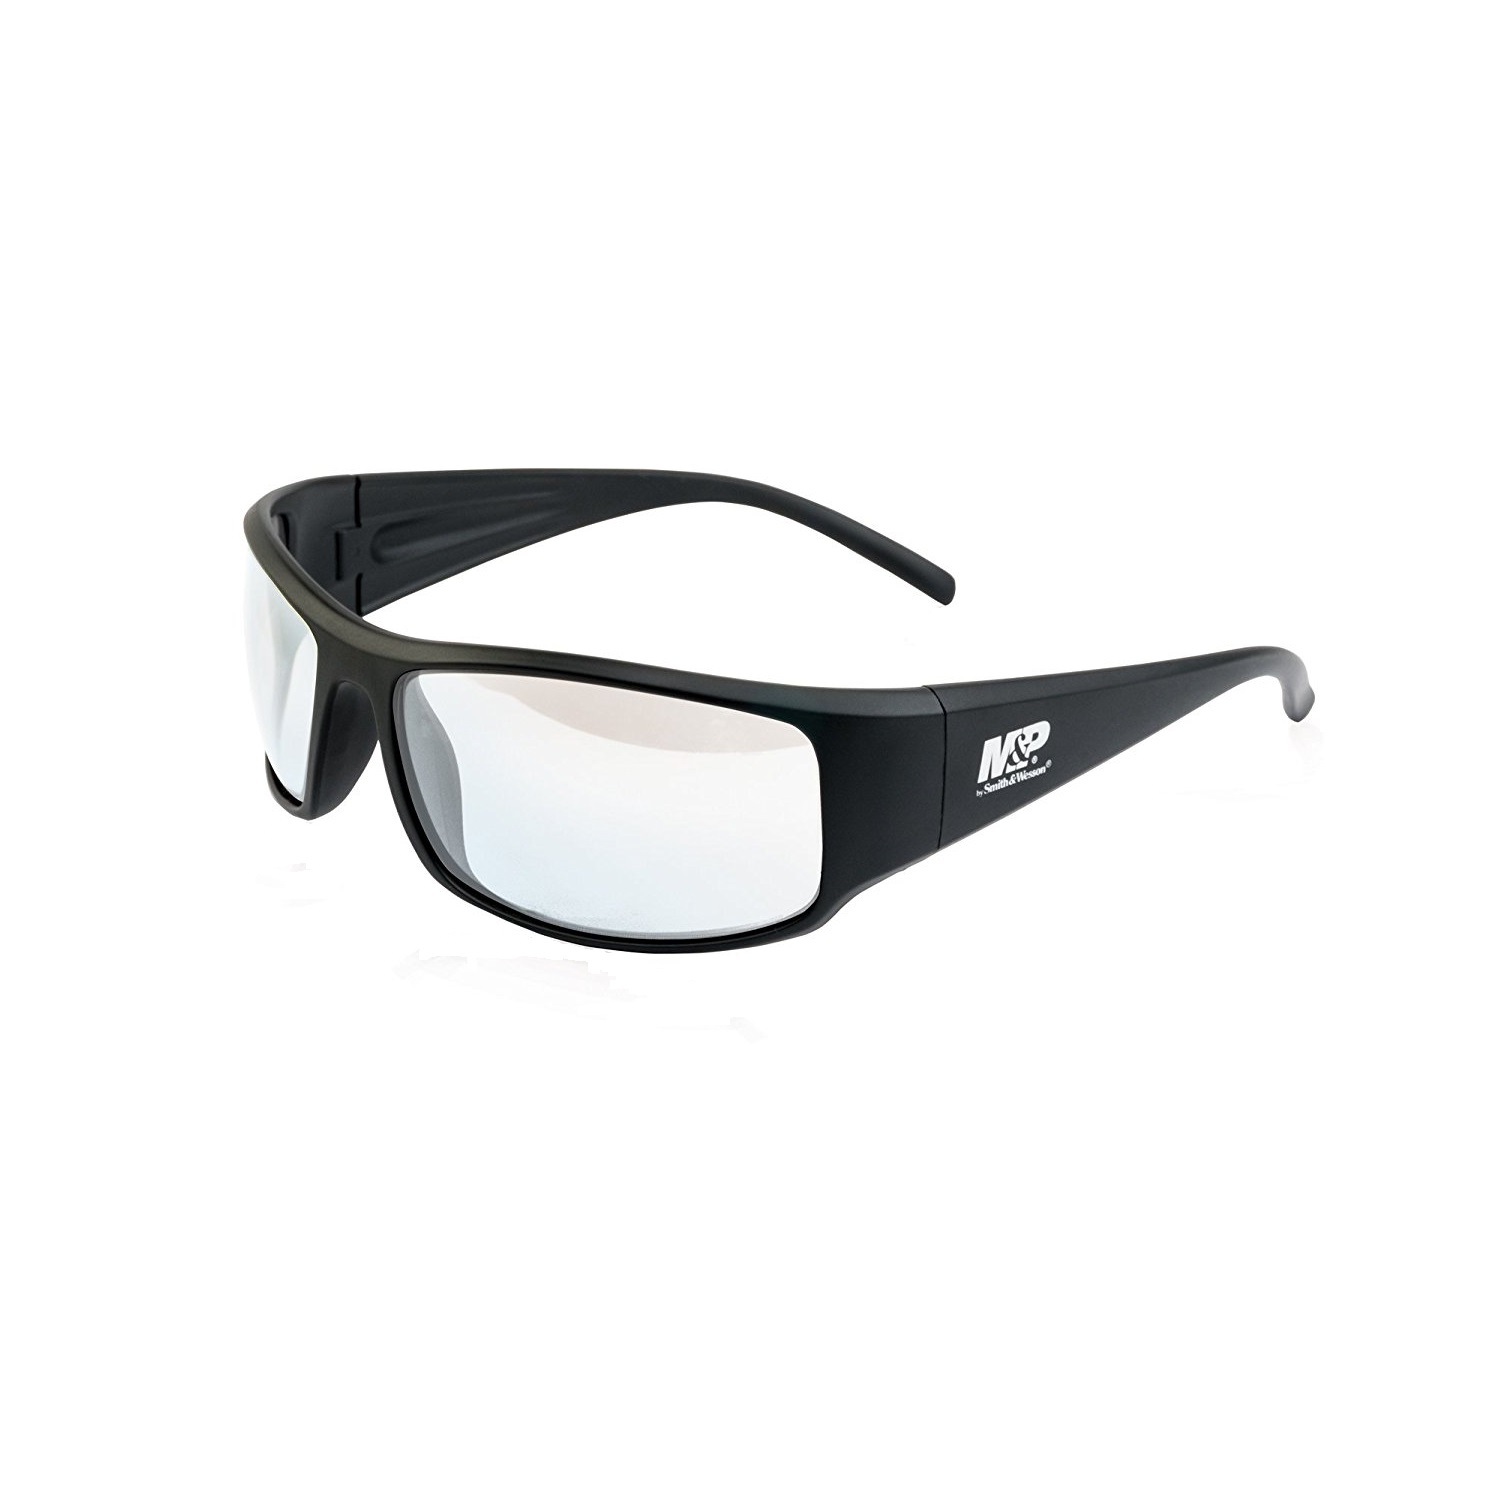 M&P Accessories 110168 Thunderbolt Shooting Glasses Clear Mirror Lens Black Polymer Full Size Frame Includes Case & Cleaning Cloth